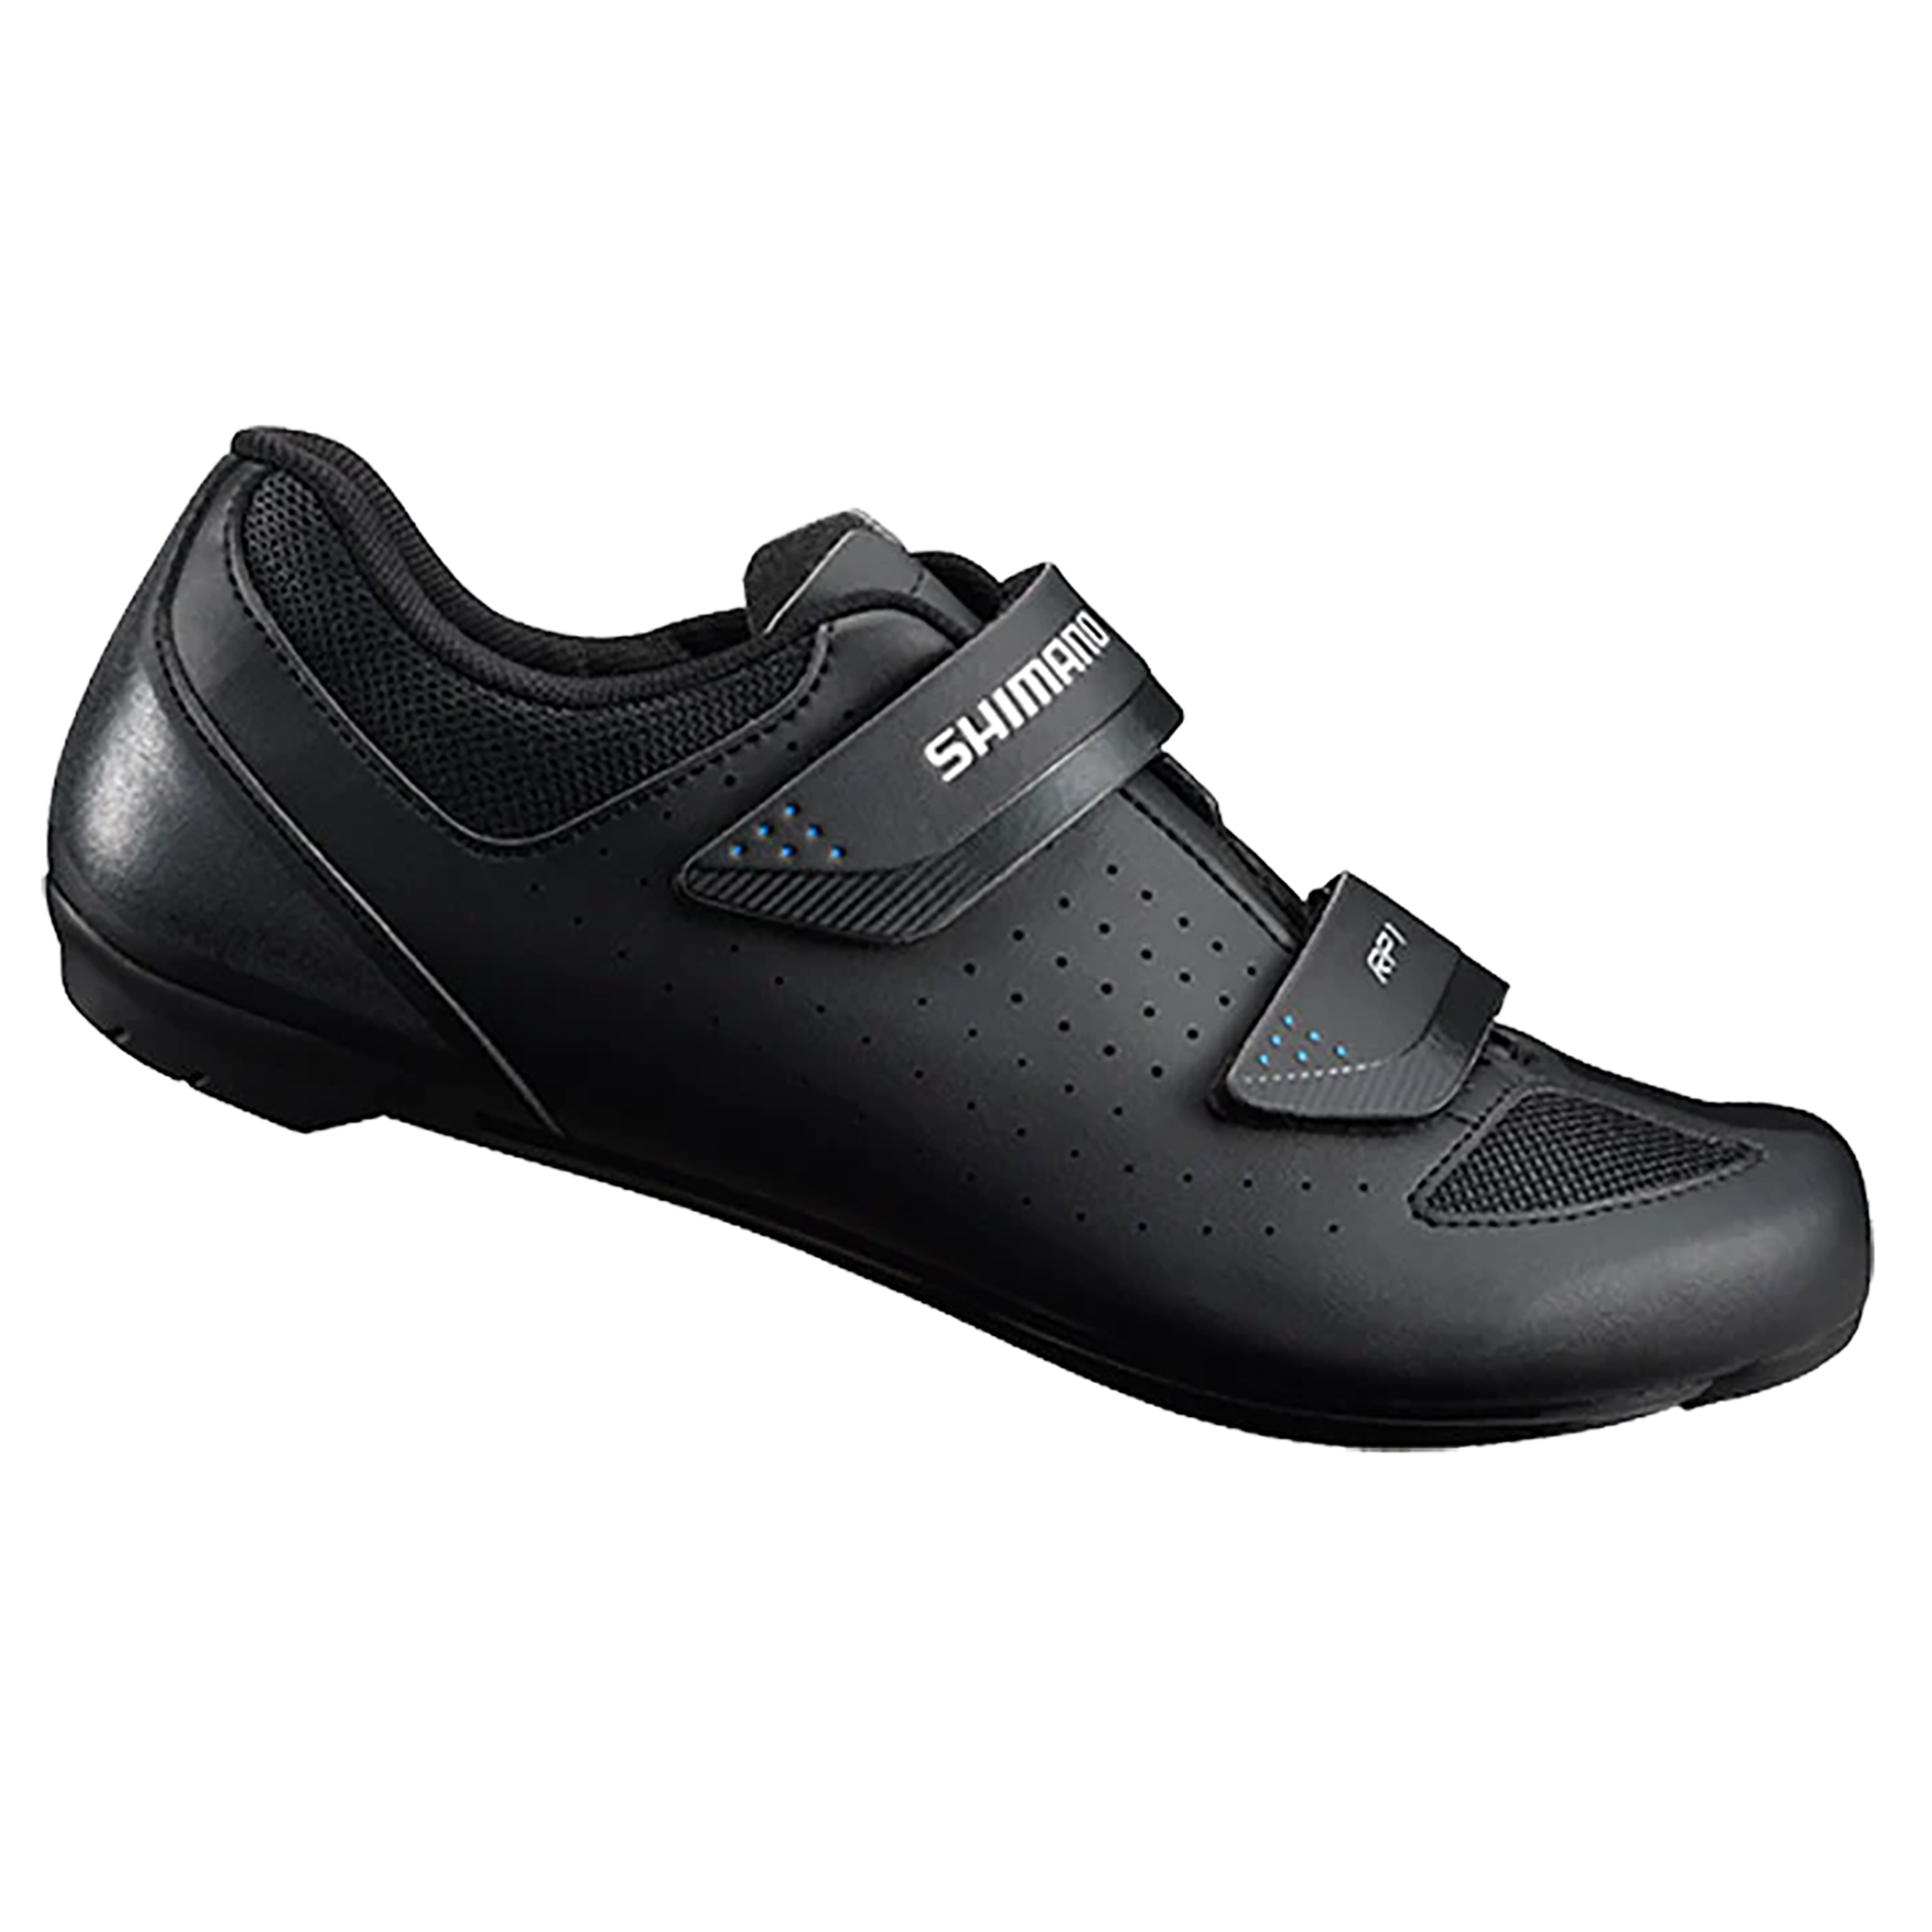 Shimano RP1 Road Bicycle Shoes For SPD SL Black Size 45